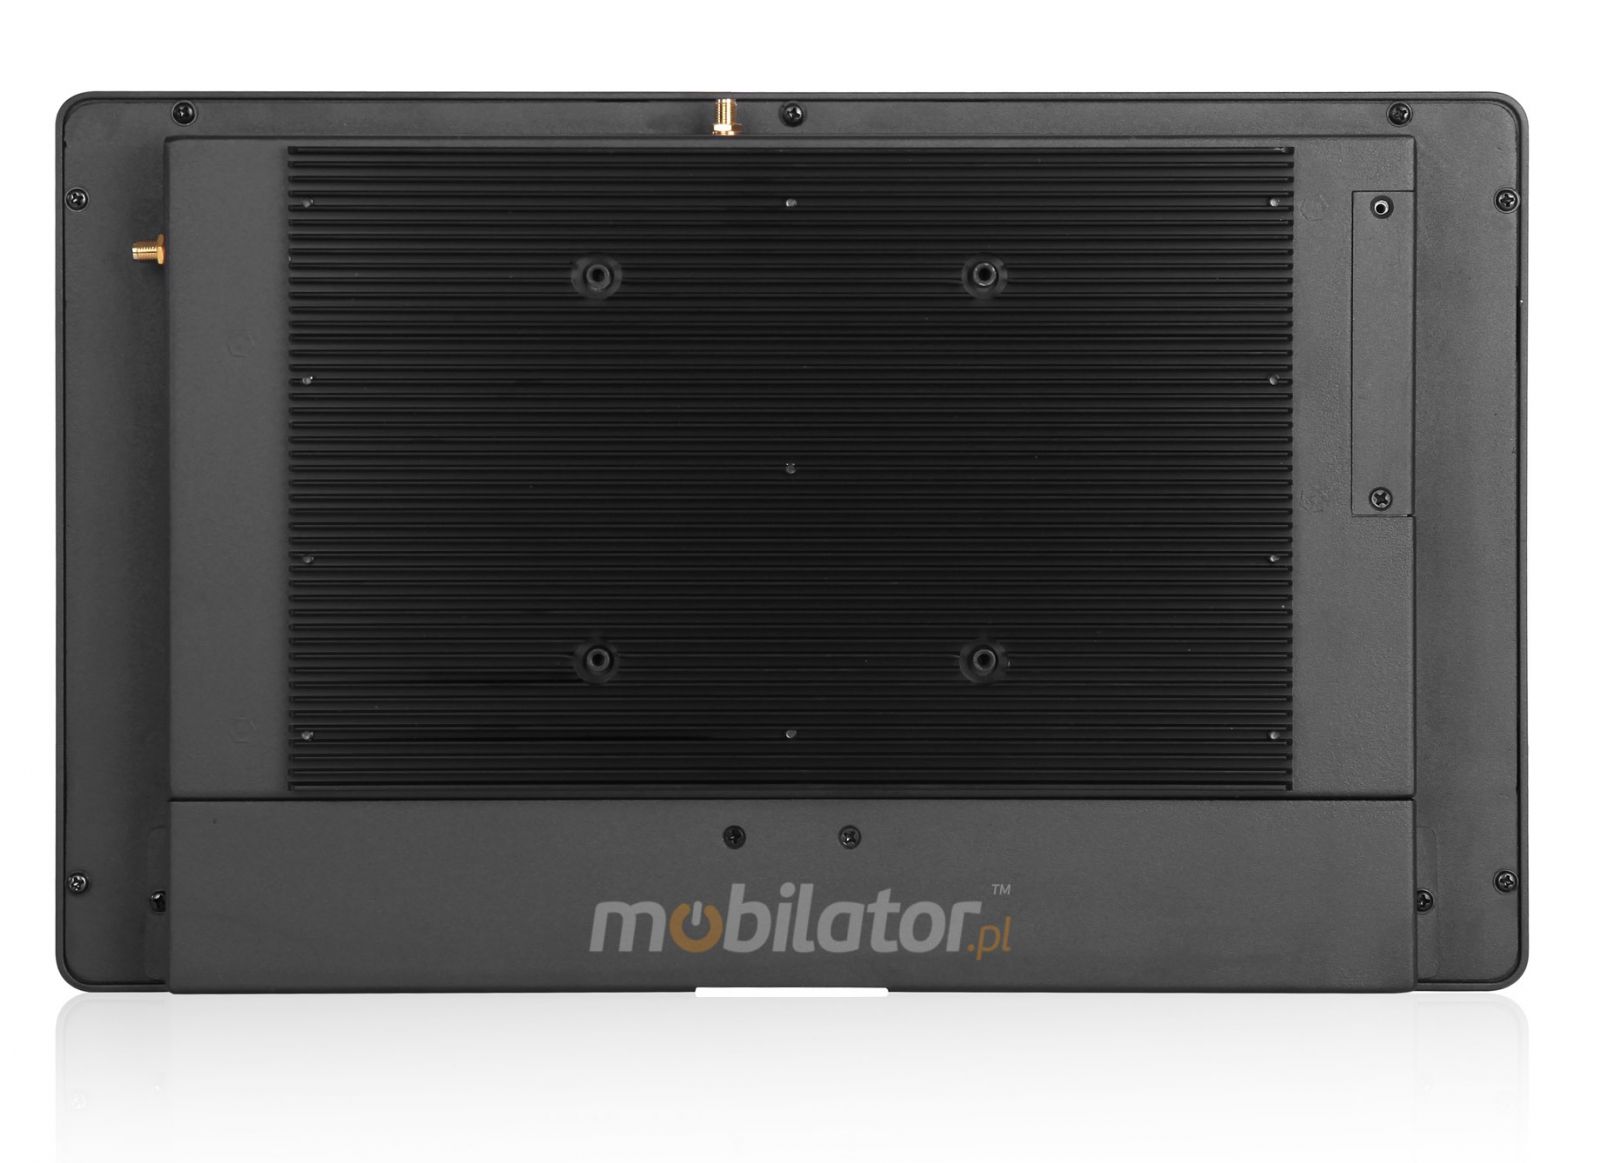 Mobilator Flat Design PCAP Fanless Touch PC, CTPC156RD3 LED panel, 10 points touch screen, built-in WIFI, 12V DC input